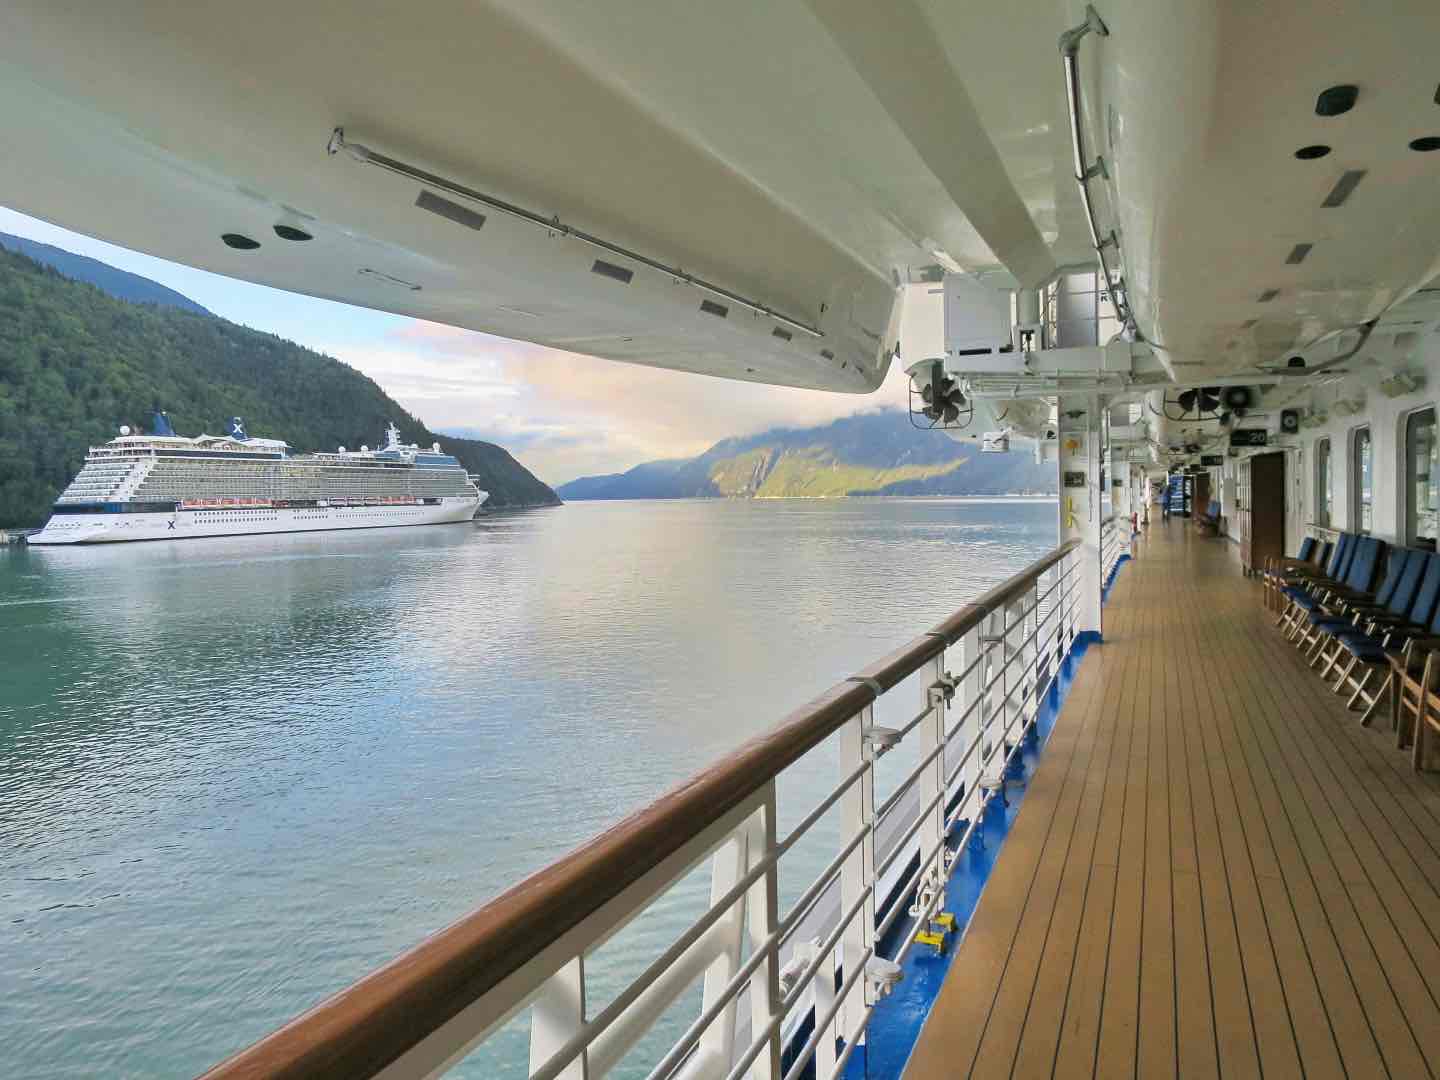 Cruise ships can be spacious and peaceful